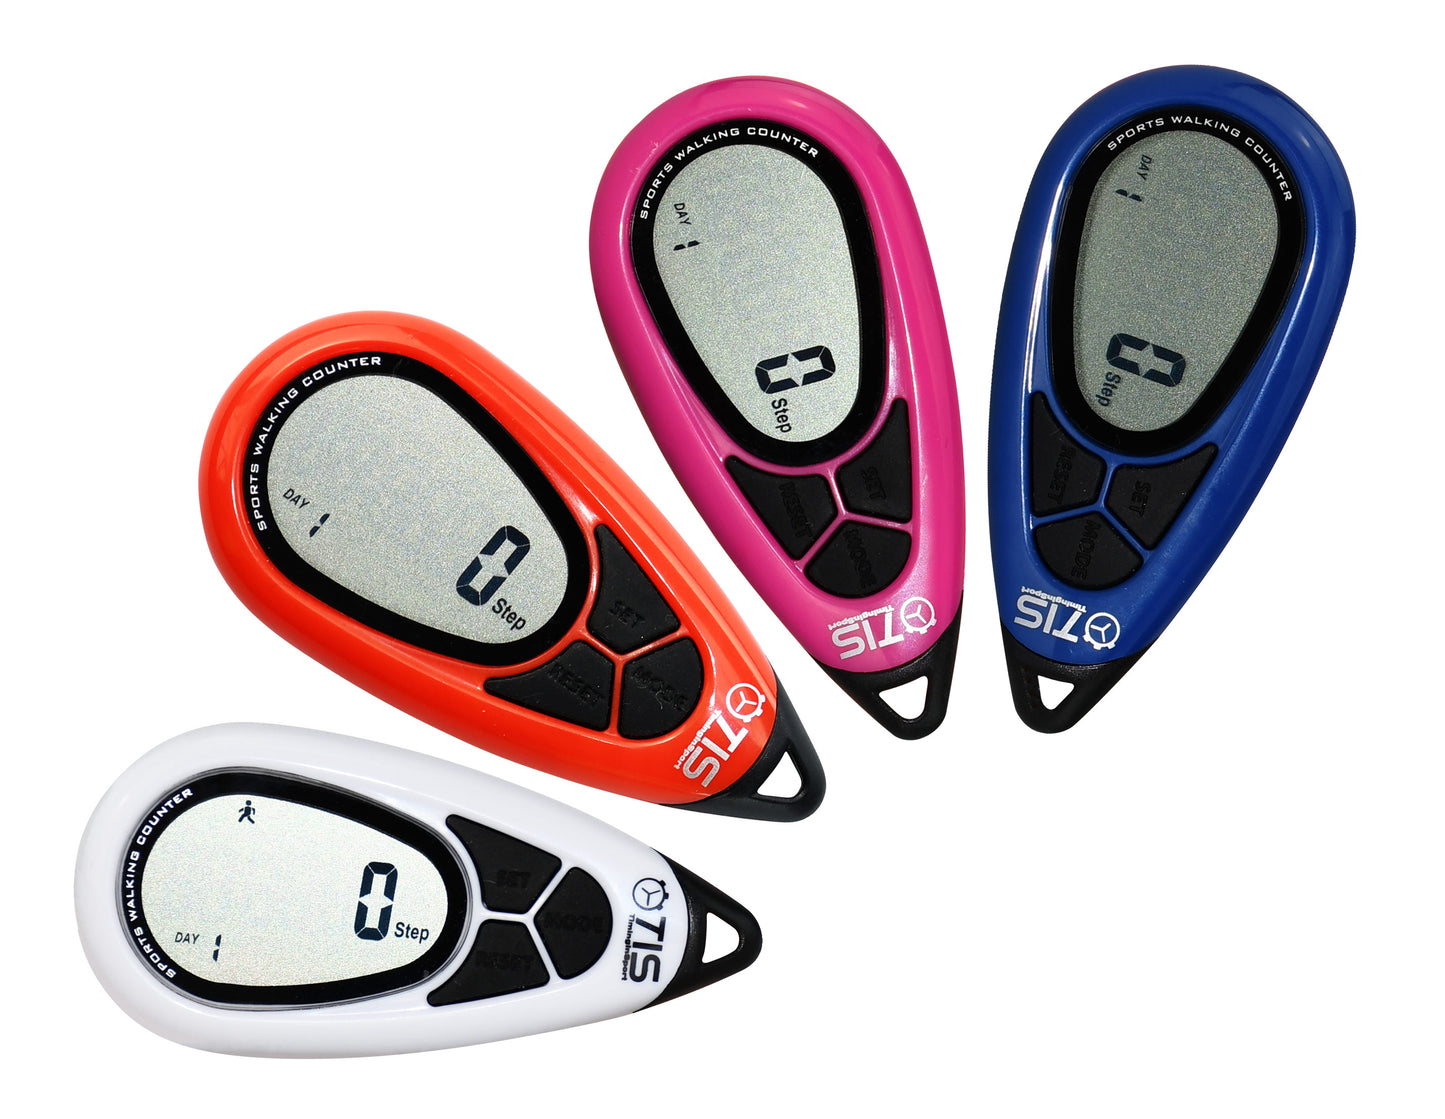 Timing in sport Pro077 Fitness 3D Pedometer with Lanyard